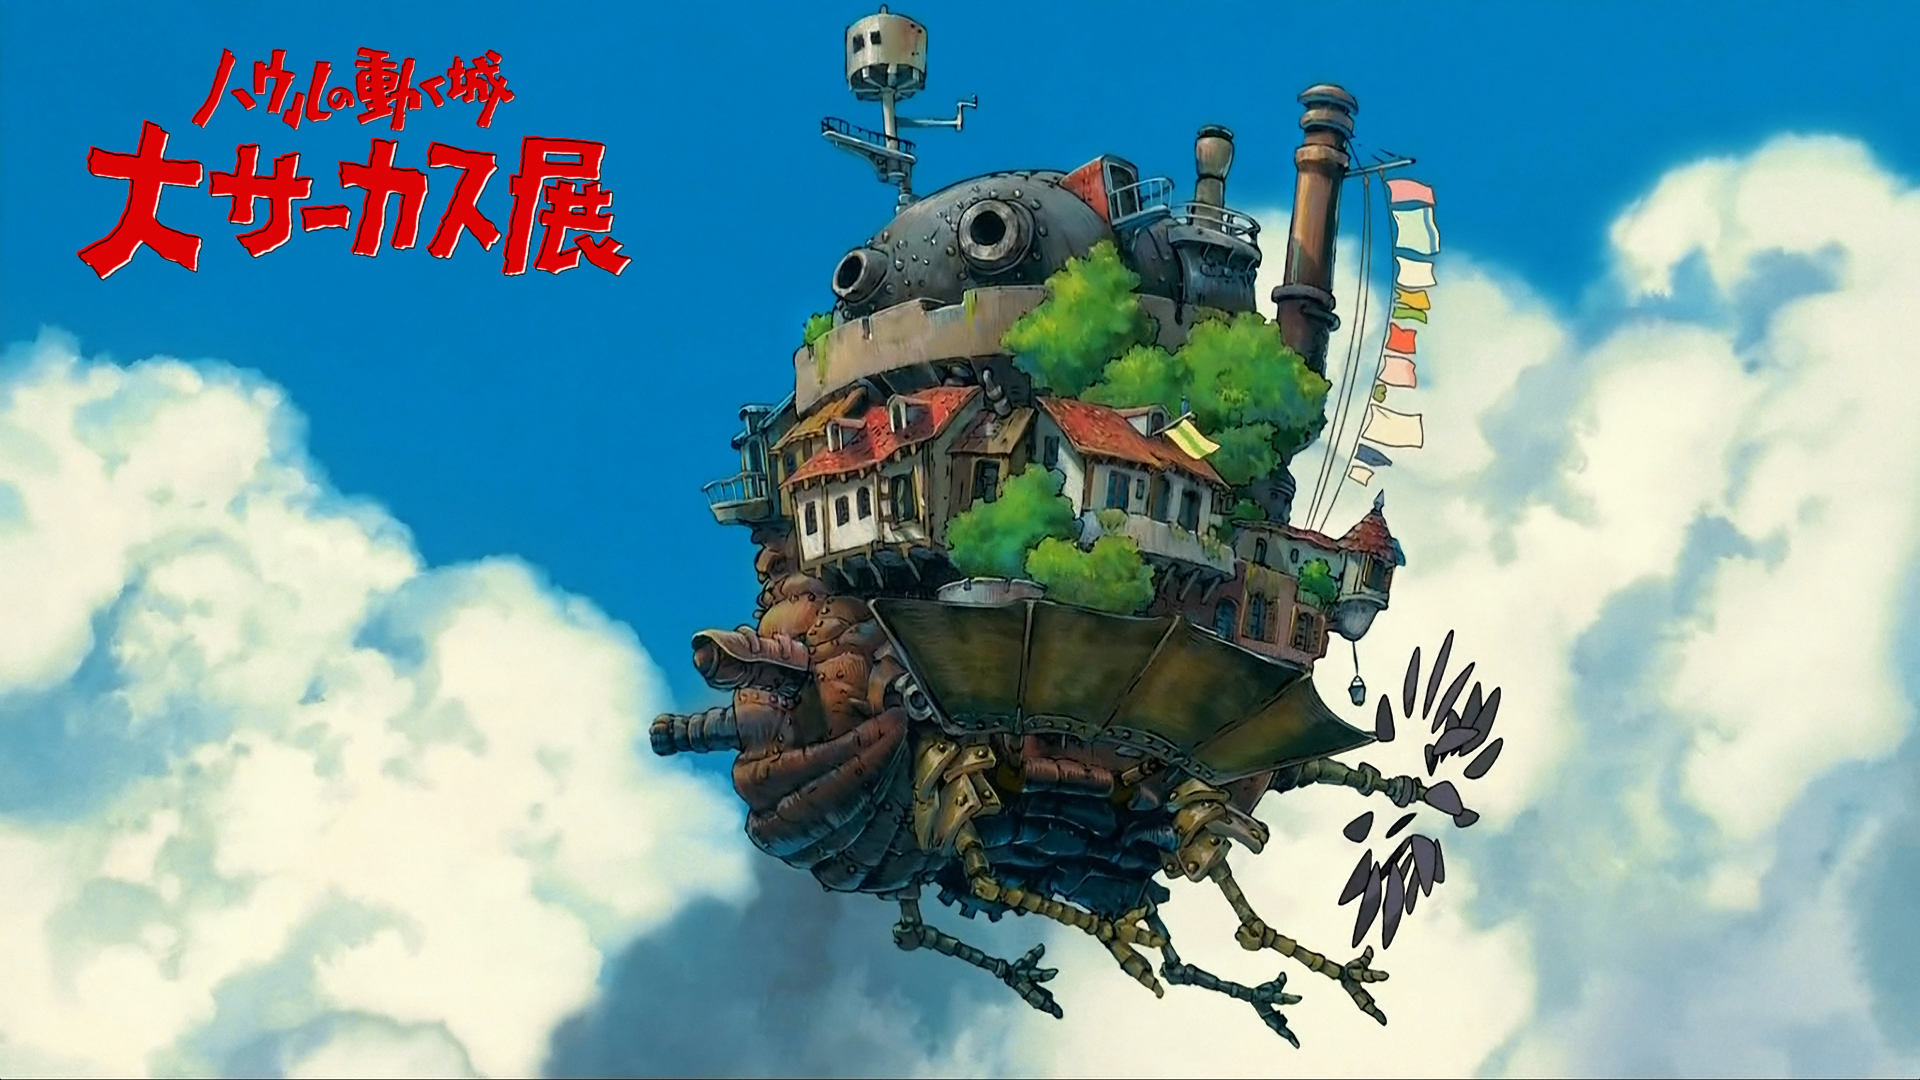 Howls moving castle wallpaper by AgaaaK  Download on ZEDGE  7df5